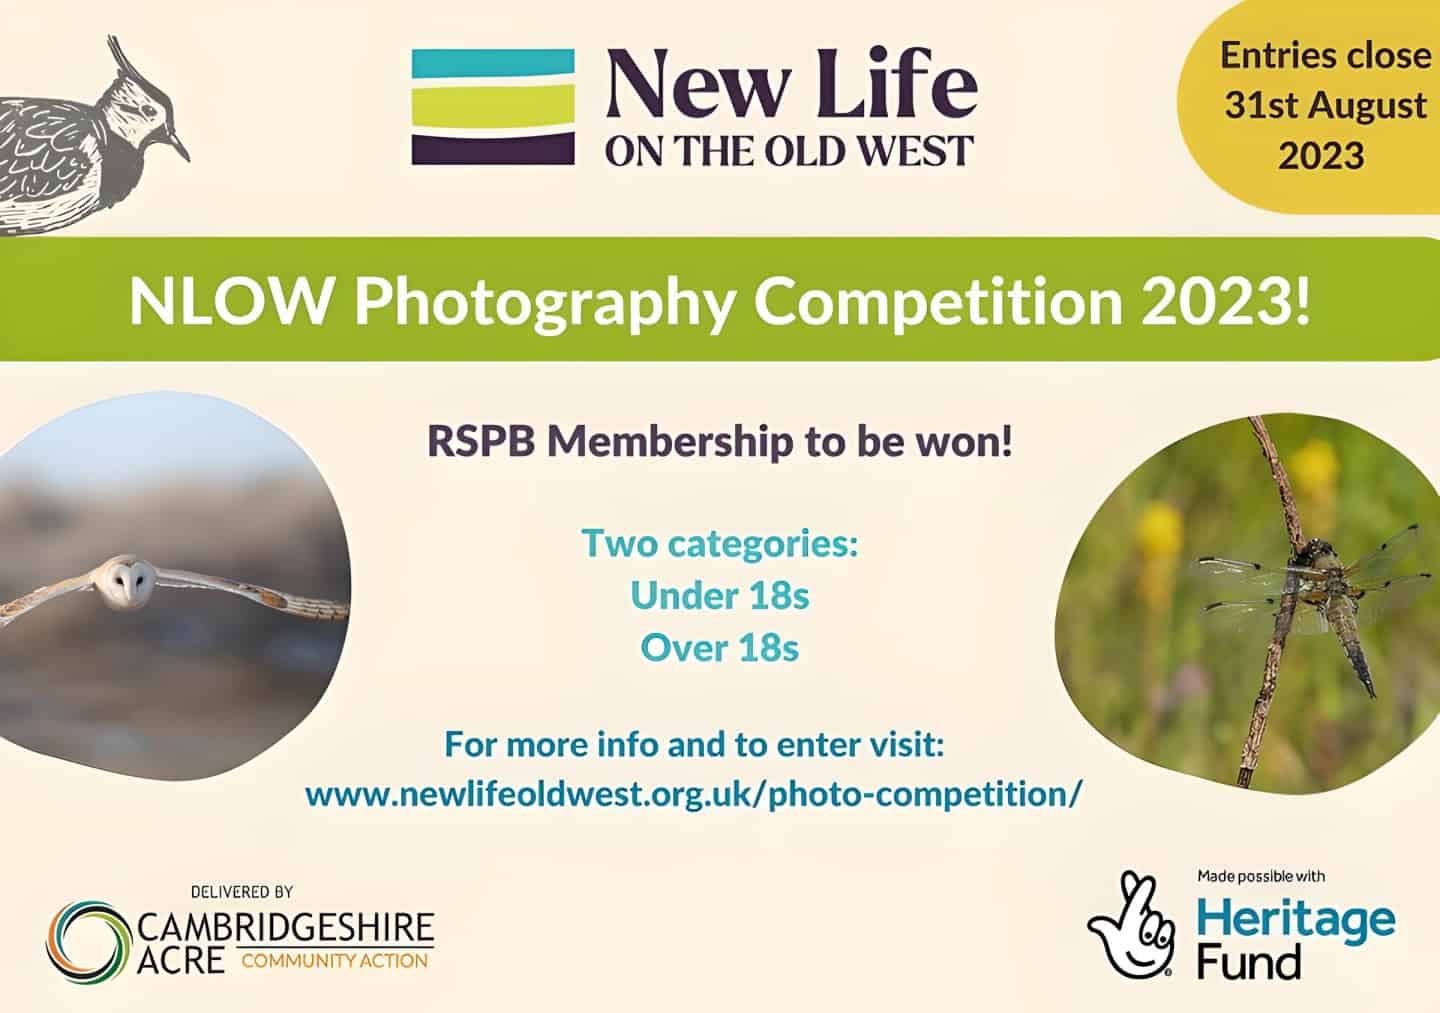 
New Life on the Old West Photography Competition
